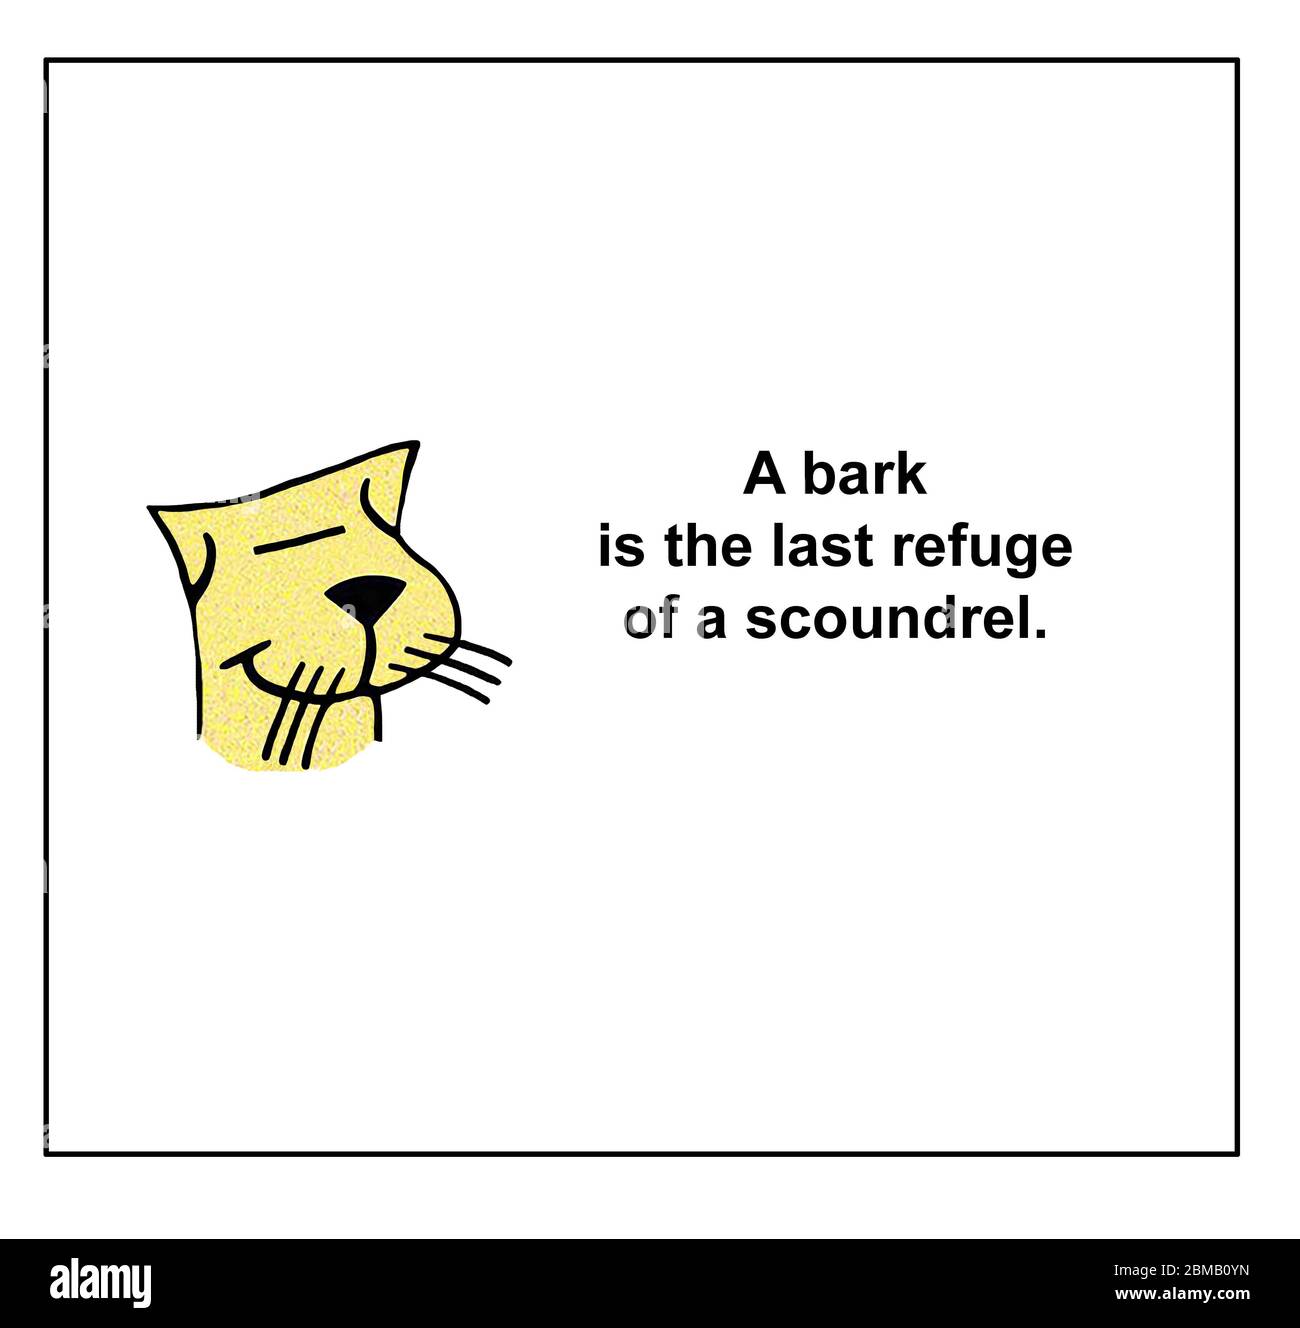 Color cartoon of smiling cat stating that a bark is the last refuge of a scoundrel. Stock Photo